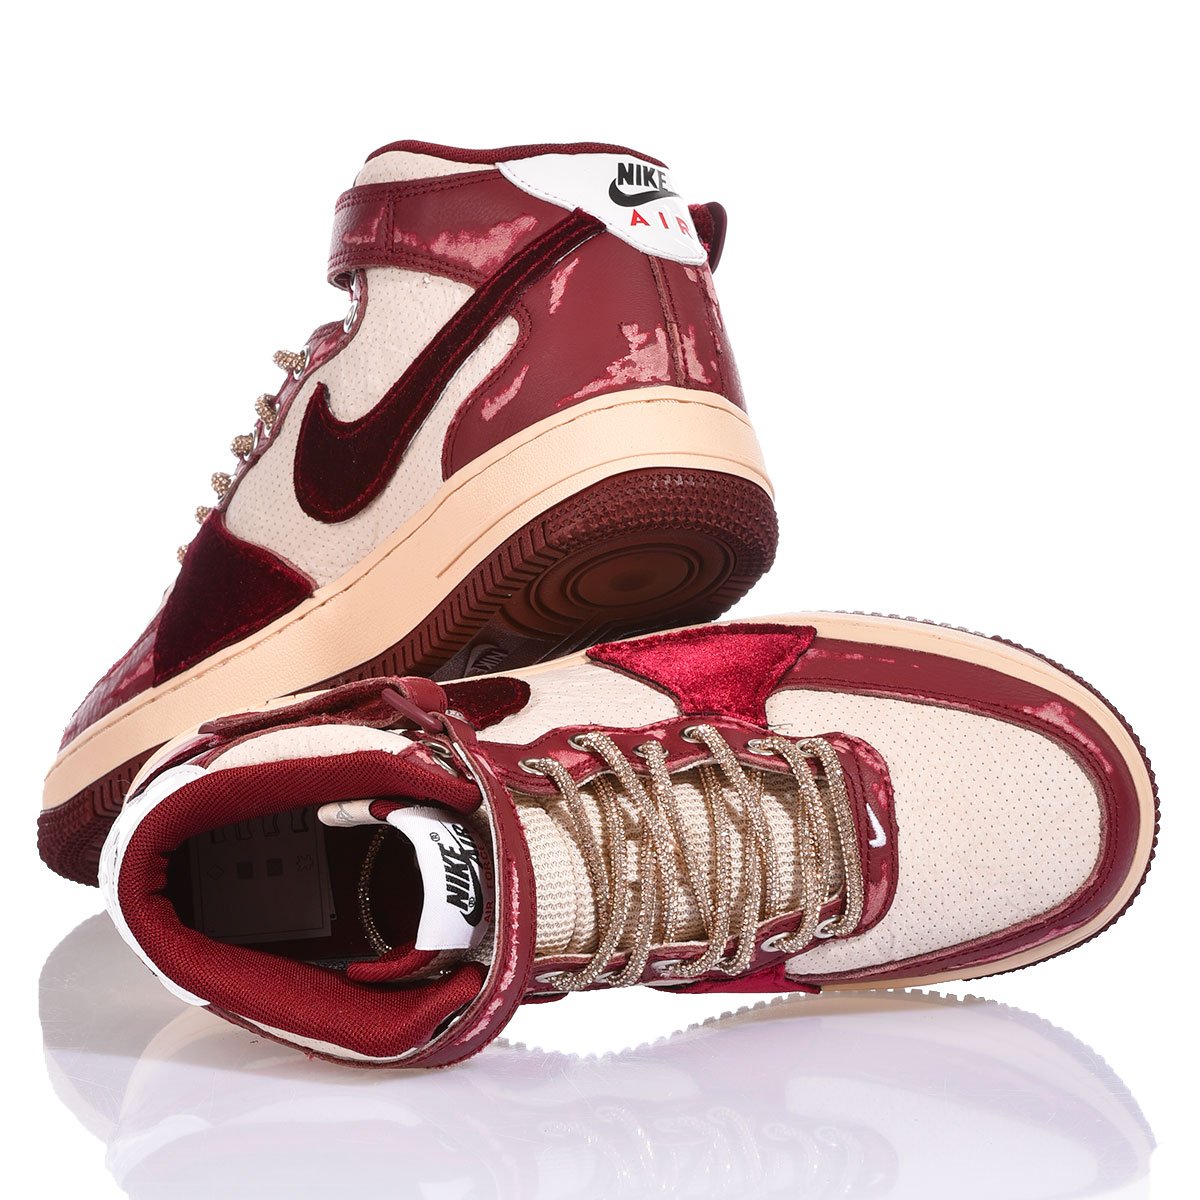 Nike Air Force 1 Winery Air Force 1 Special